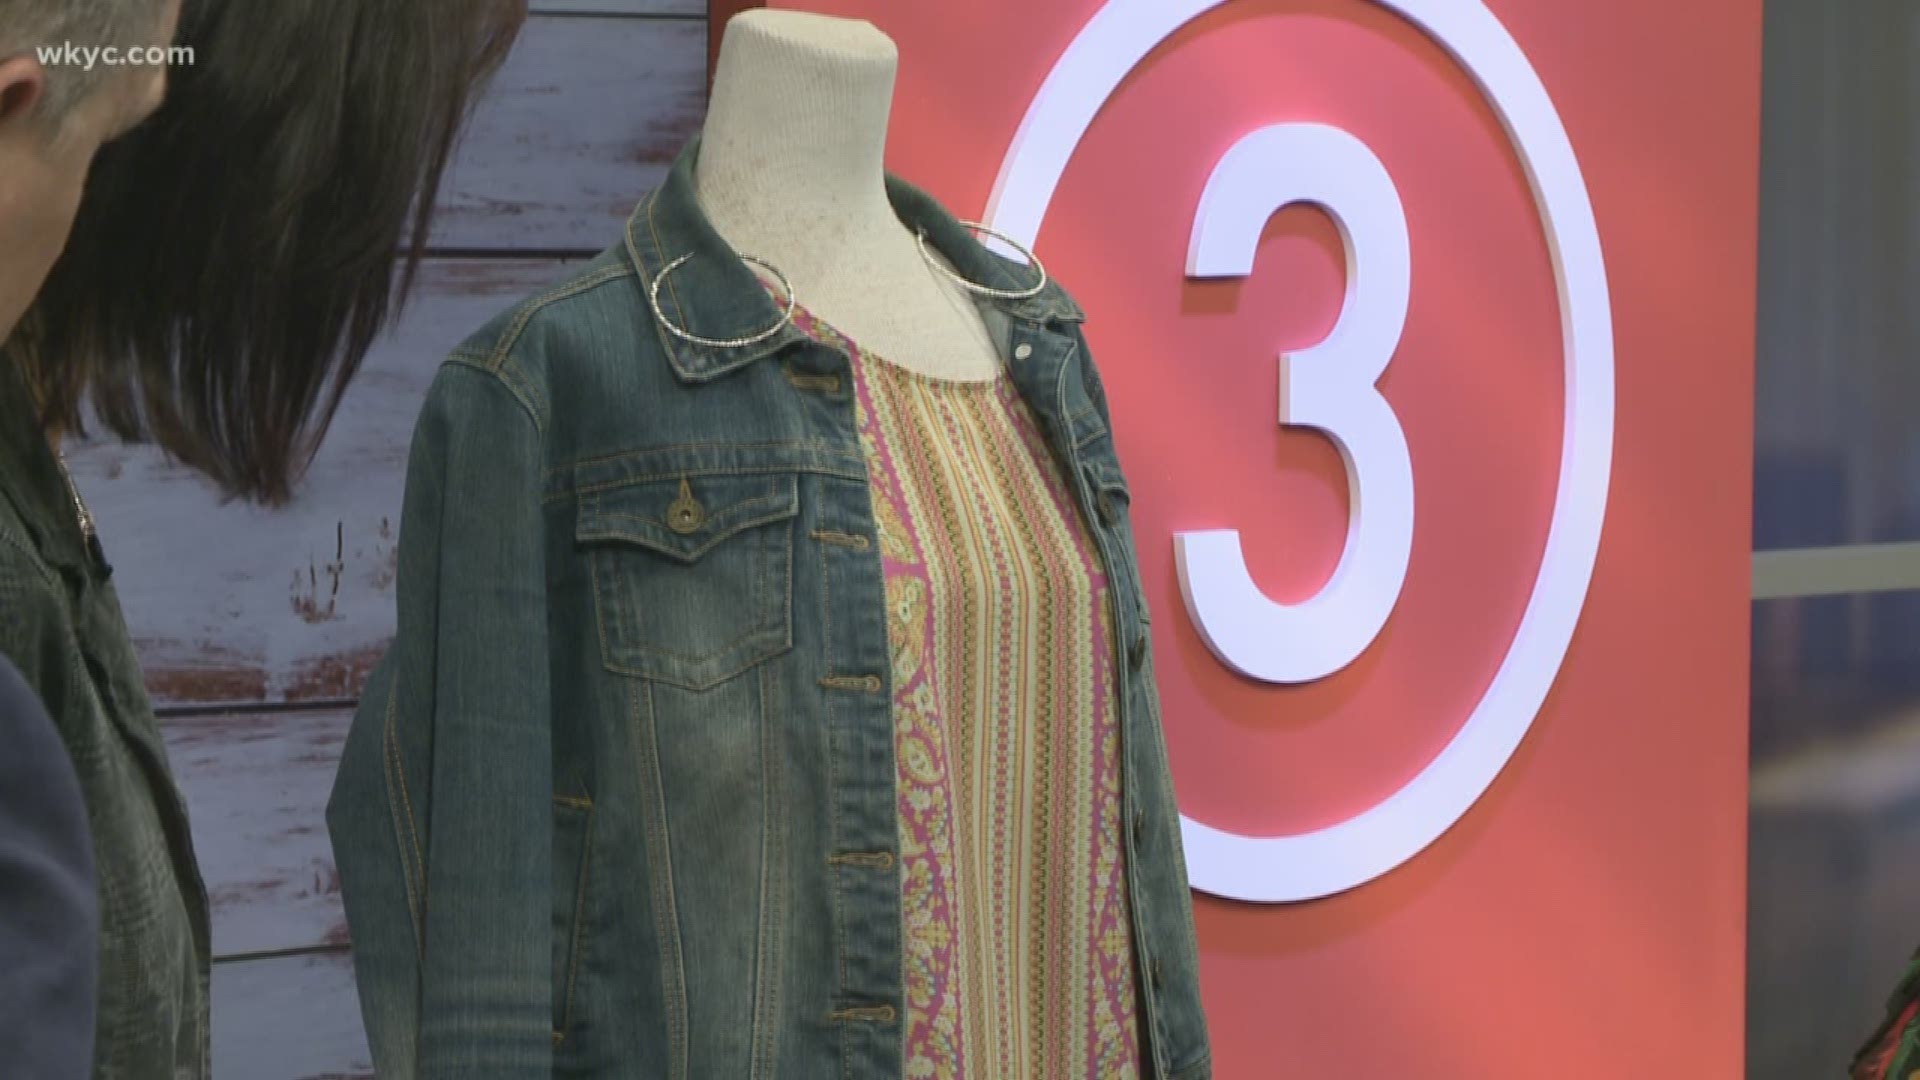 We brought in a thrifting blogger to give us some cool looks for under $25. Plus, some of our 3News personalities even modeled the styles!